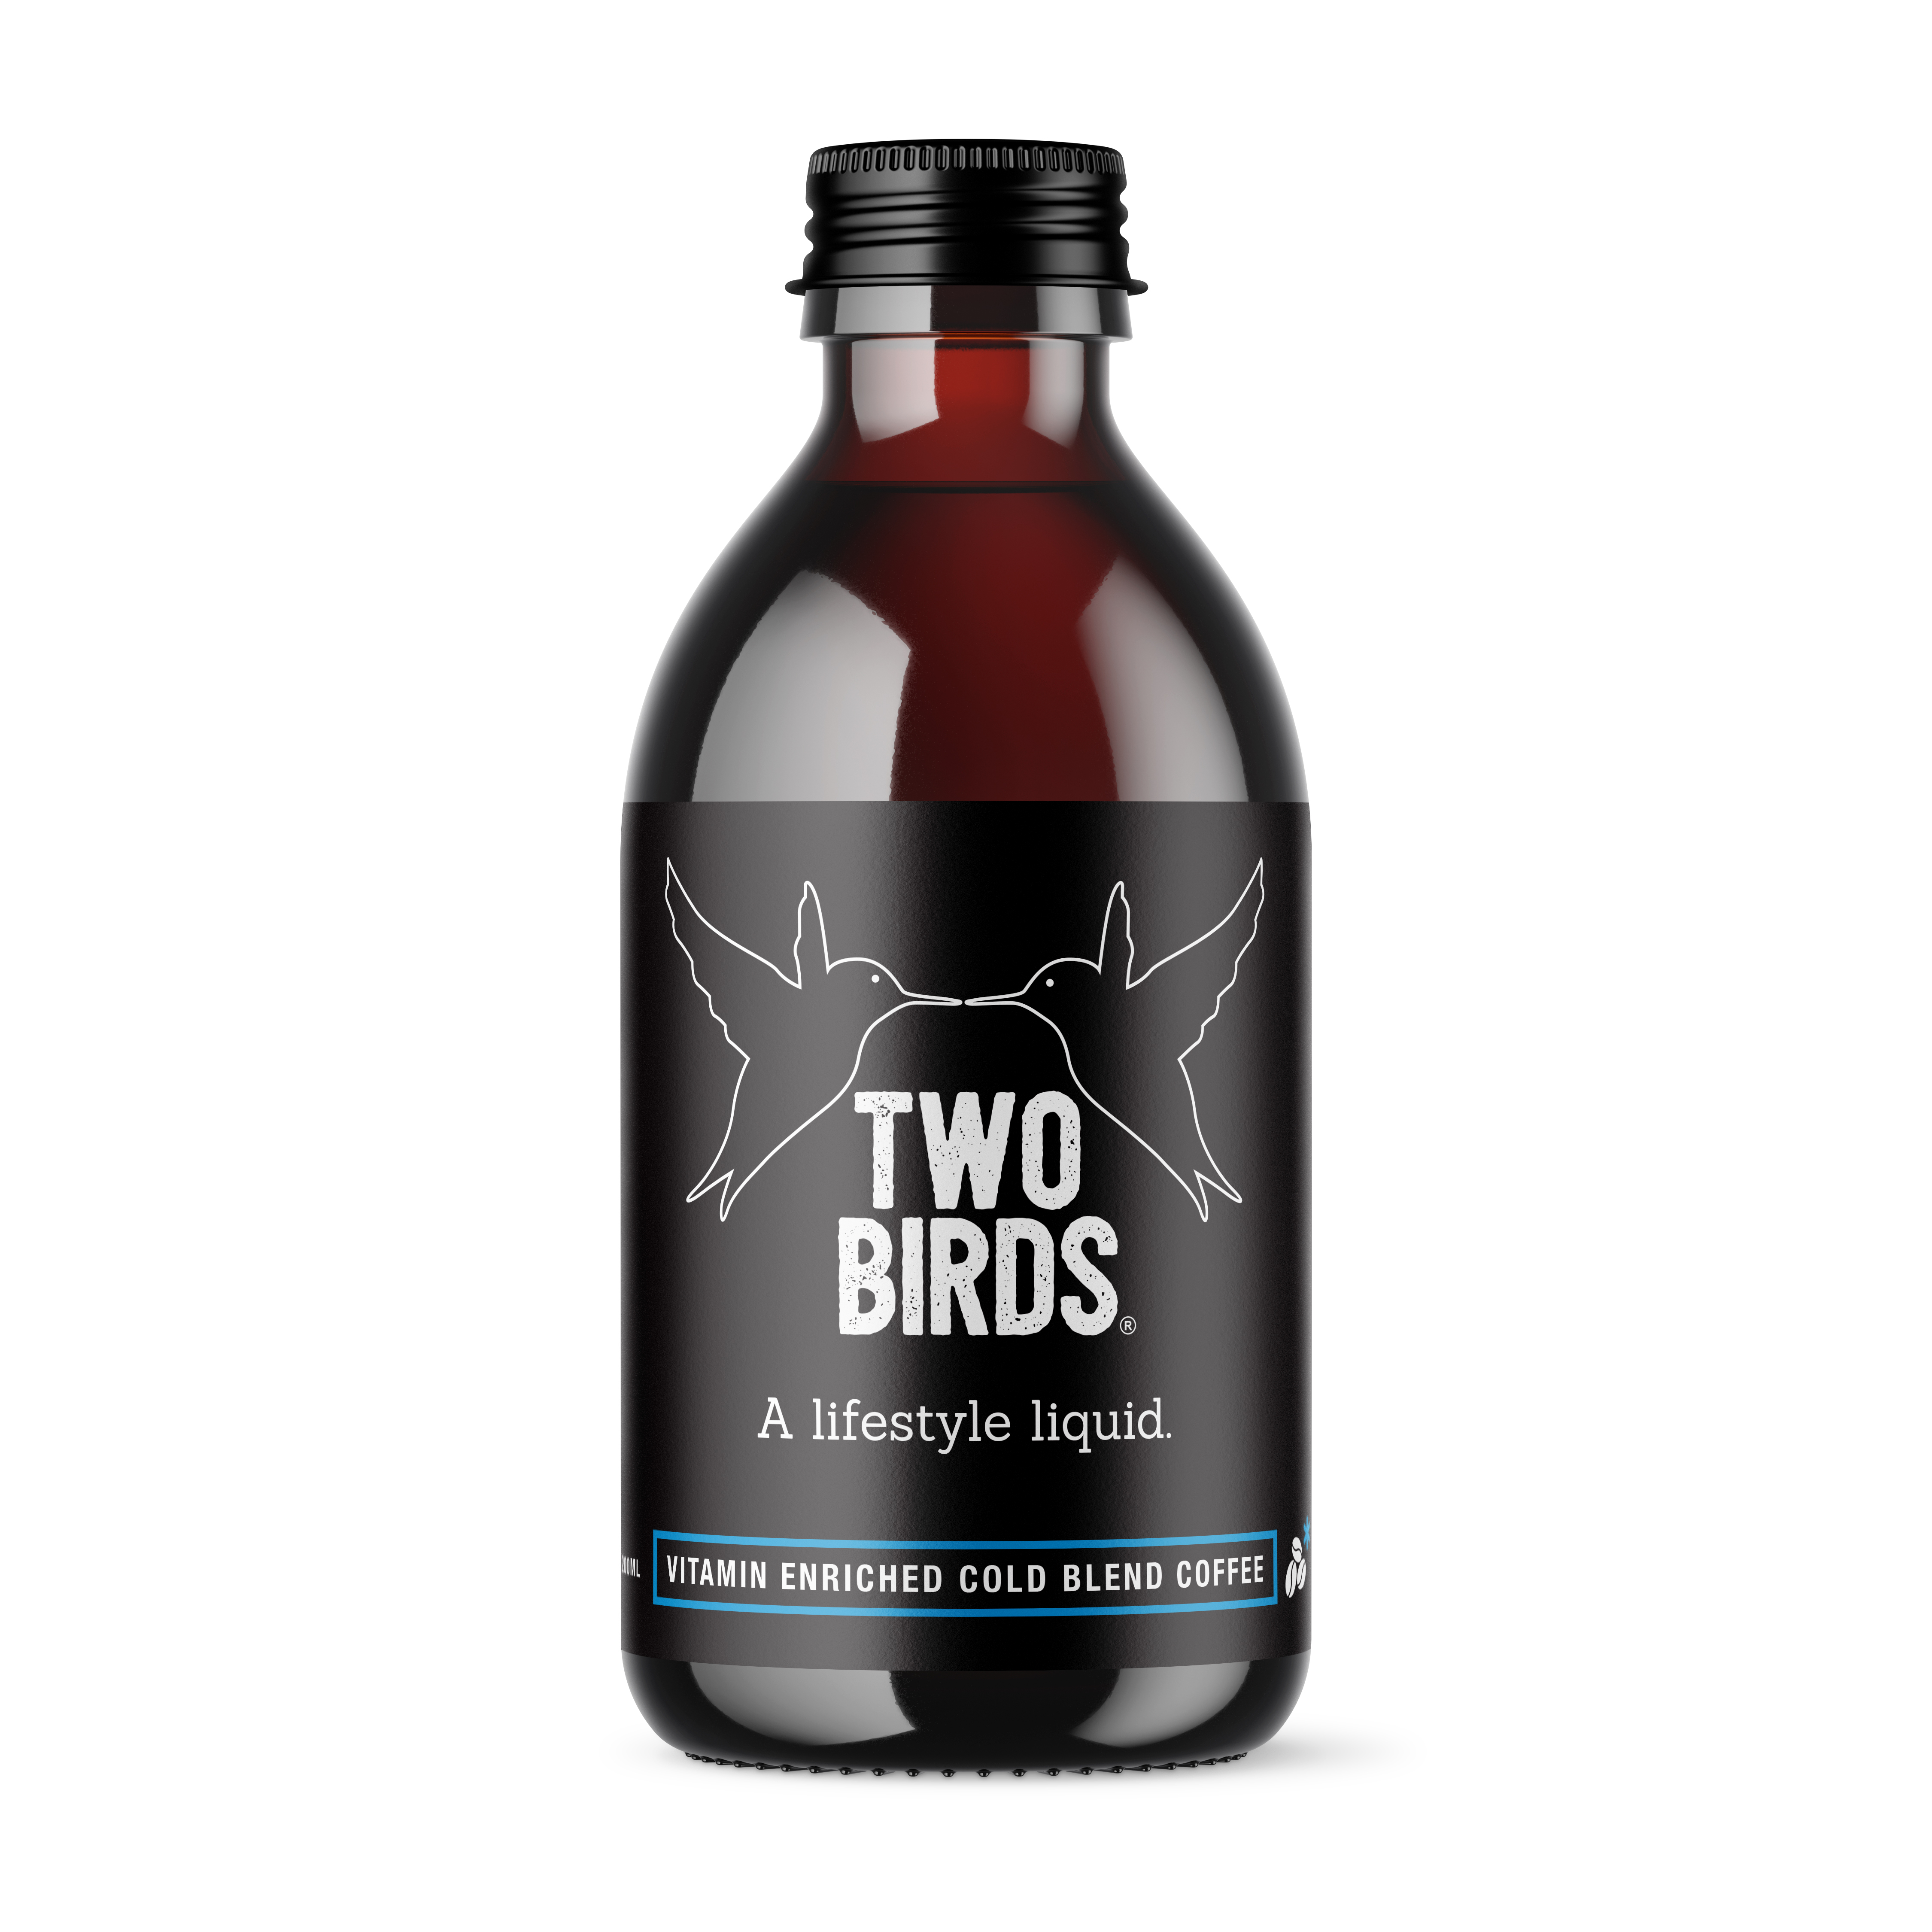 Two Birds Vitamin Enriched Cold Blend ...